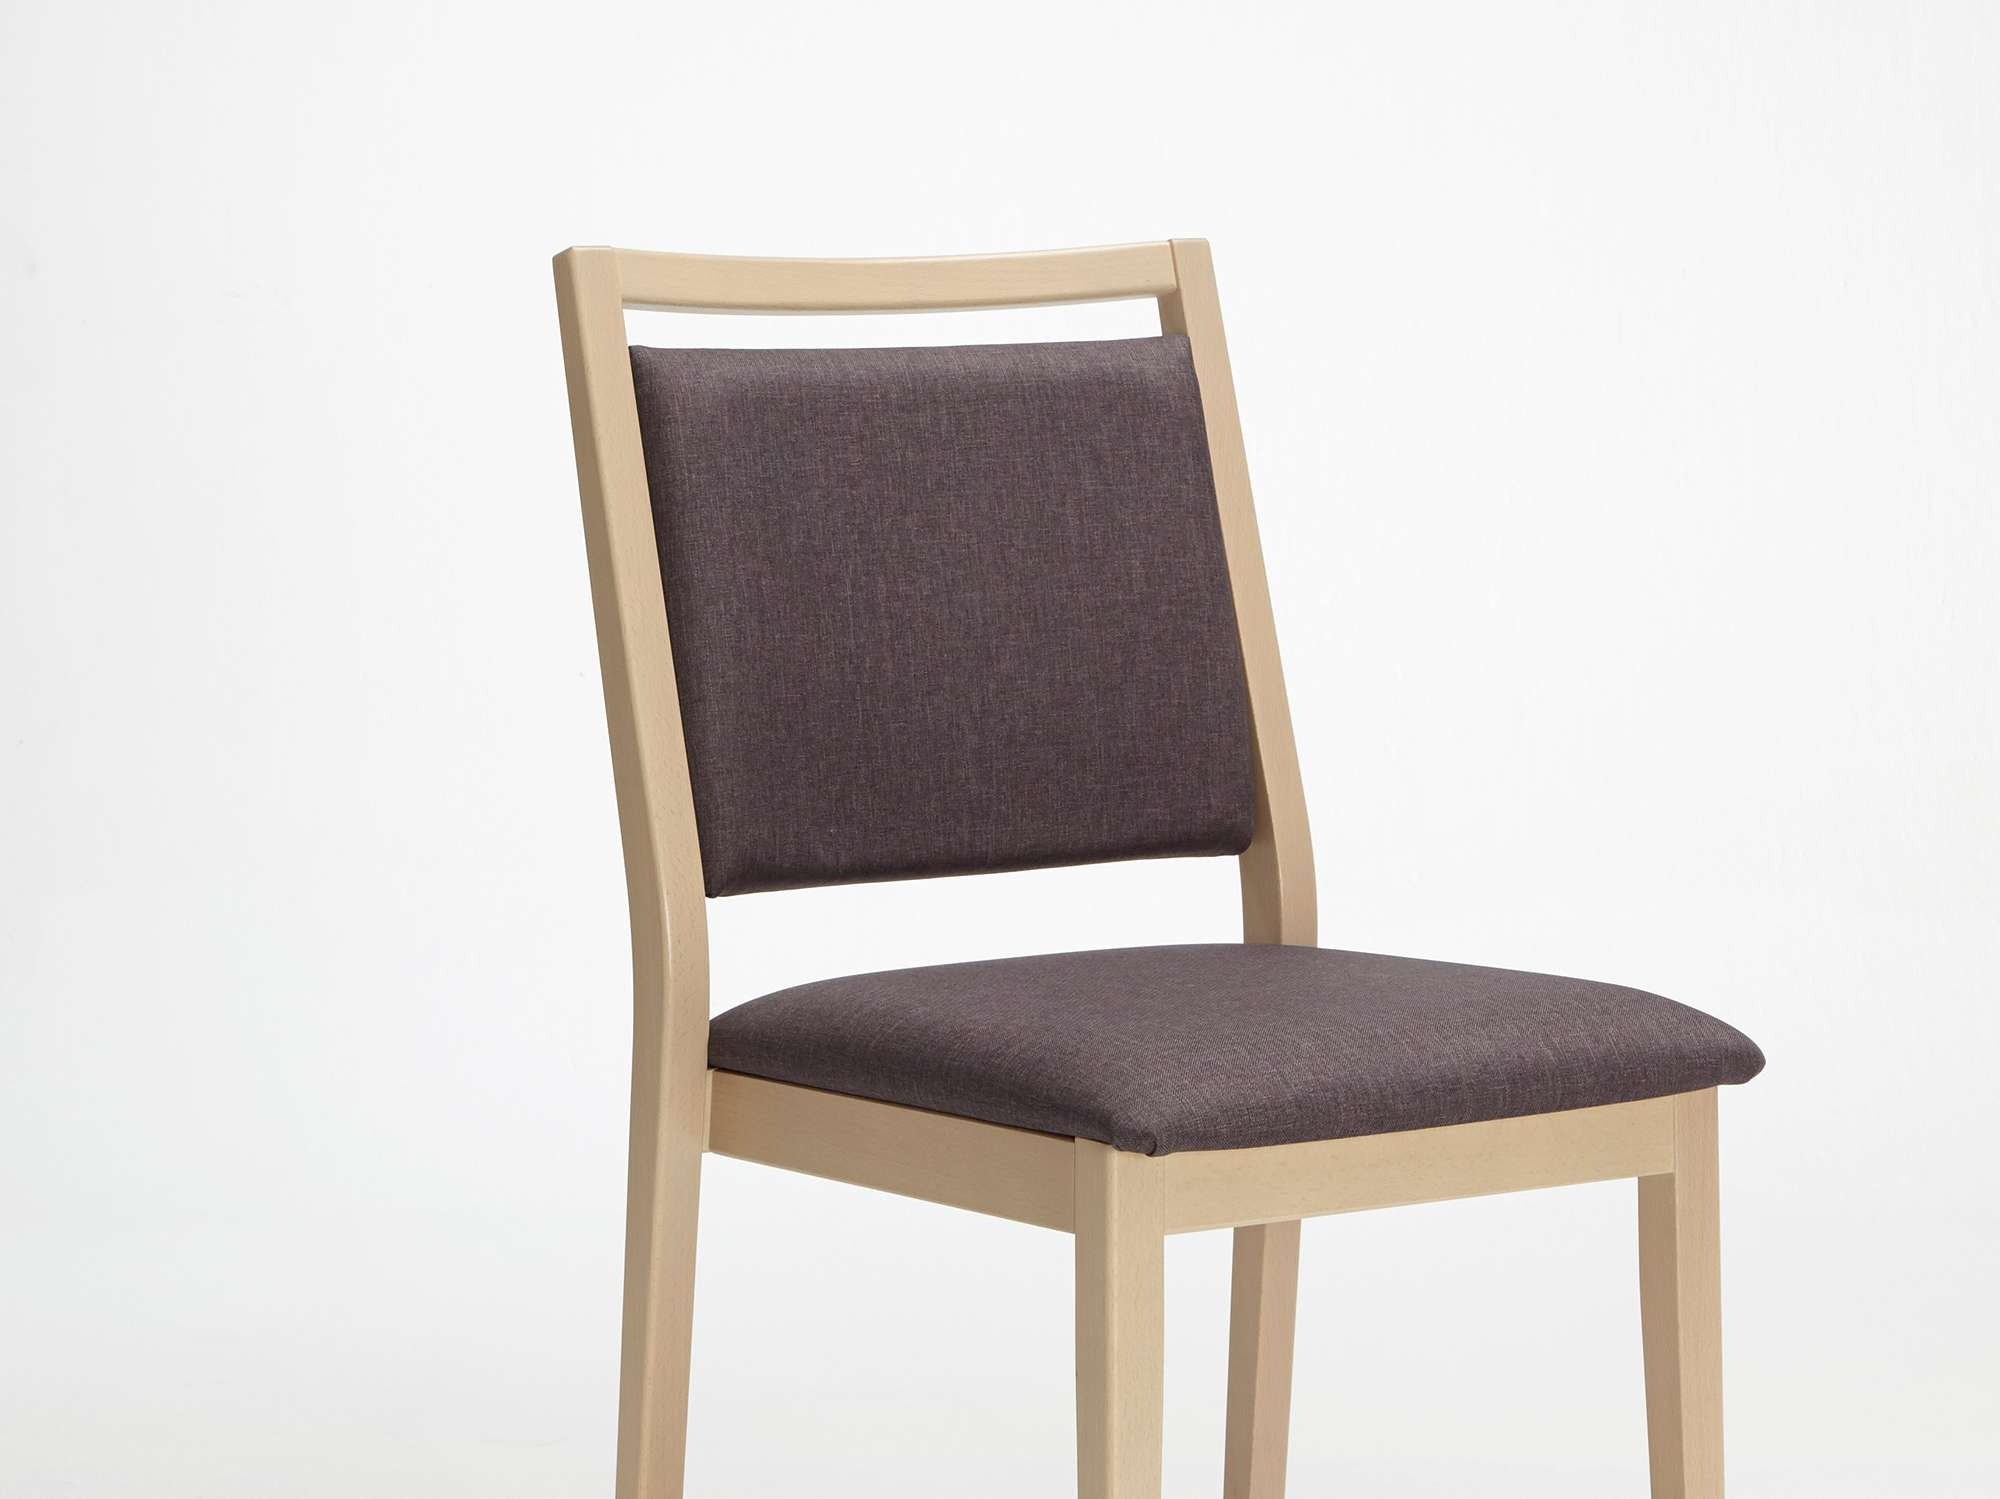 The Mavo model as a stackable chair without armrests